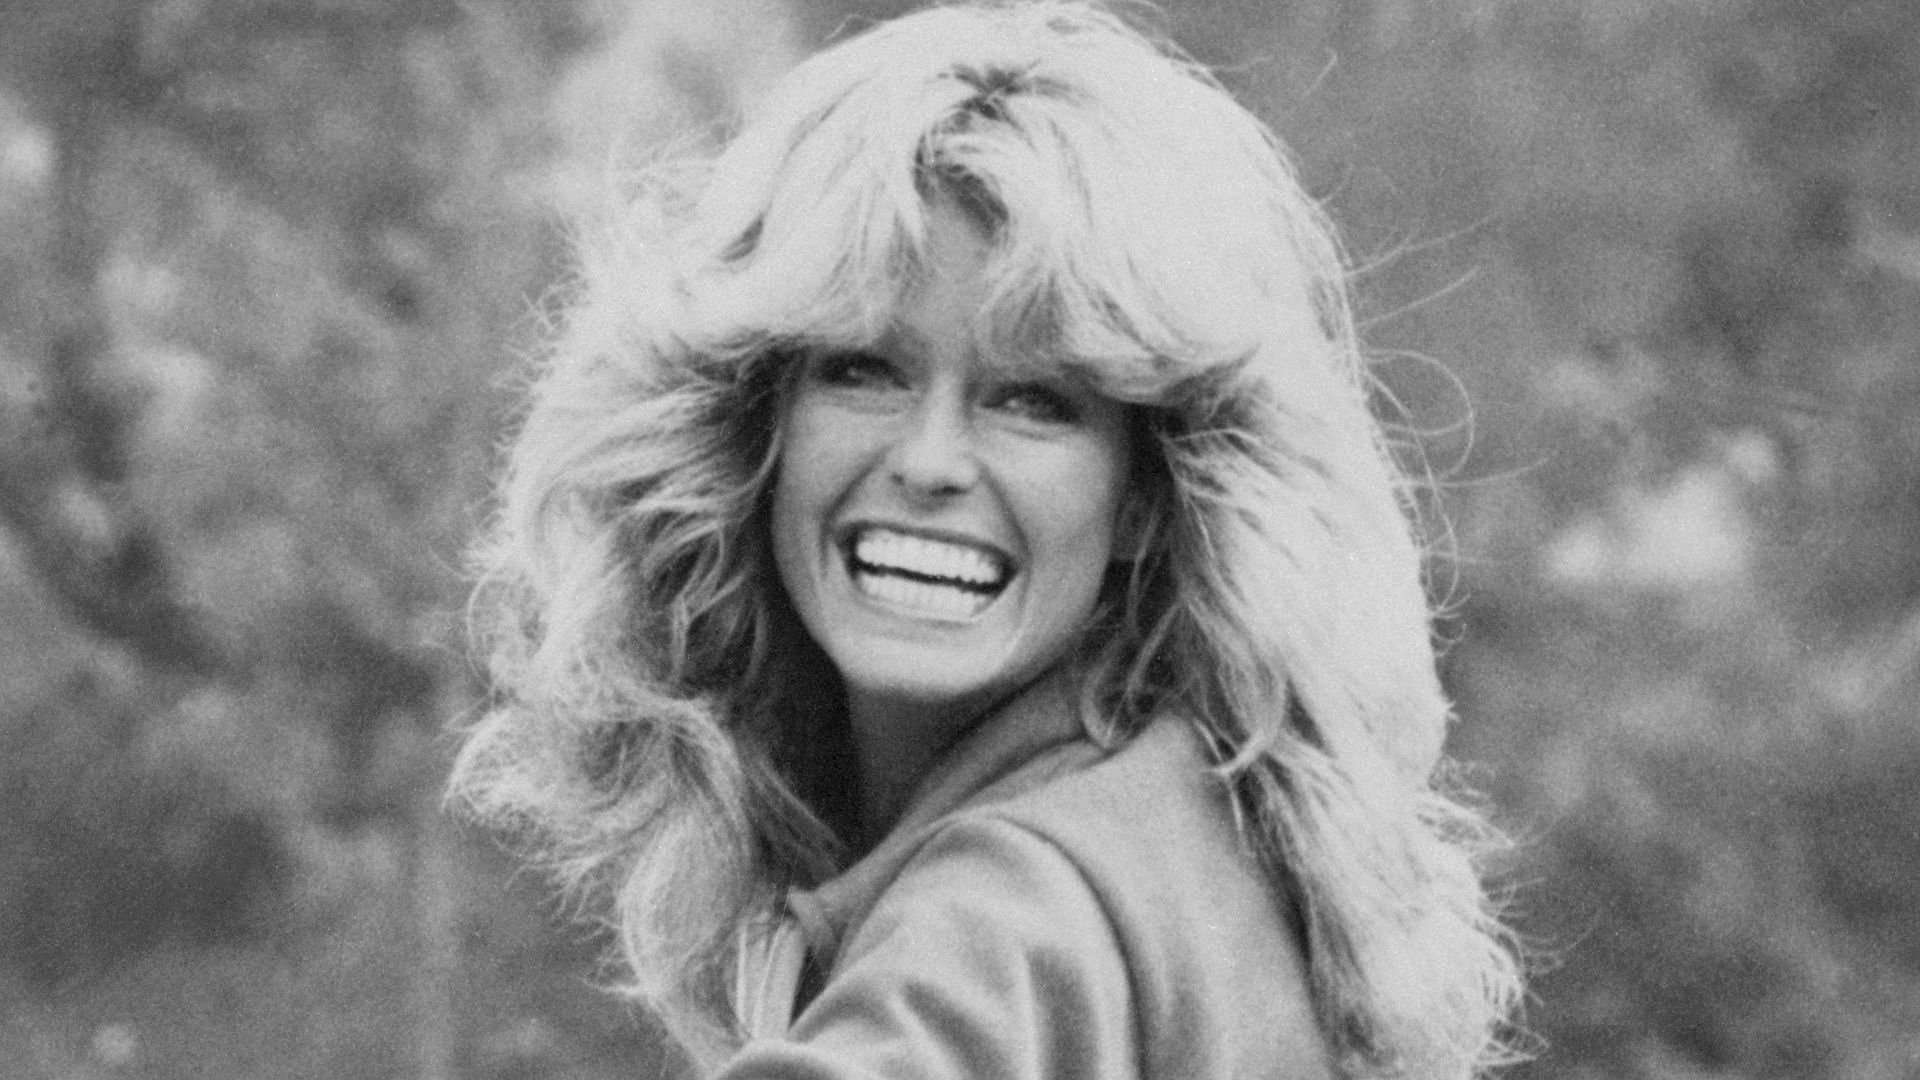 Actress Farrah Fawcett, wearing jeans, sweatshirt and Nike athletic shoes, practices skateboarding for an episode of Charlie's Angels.